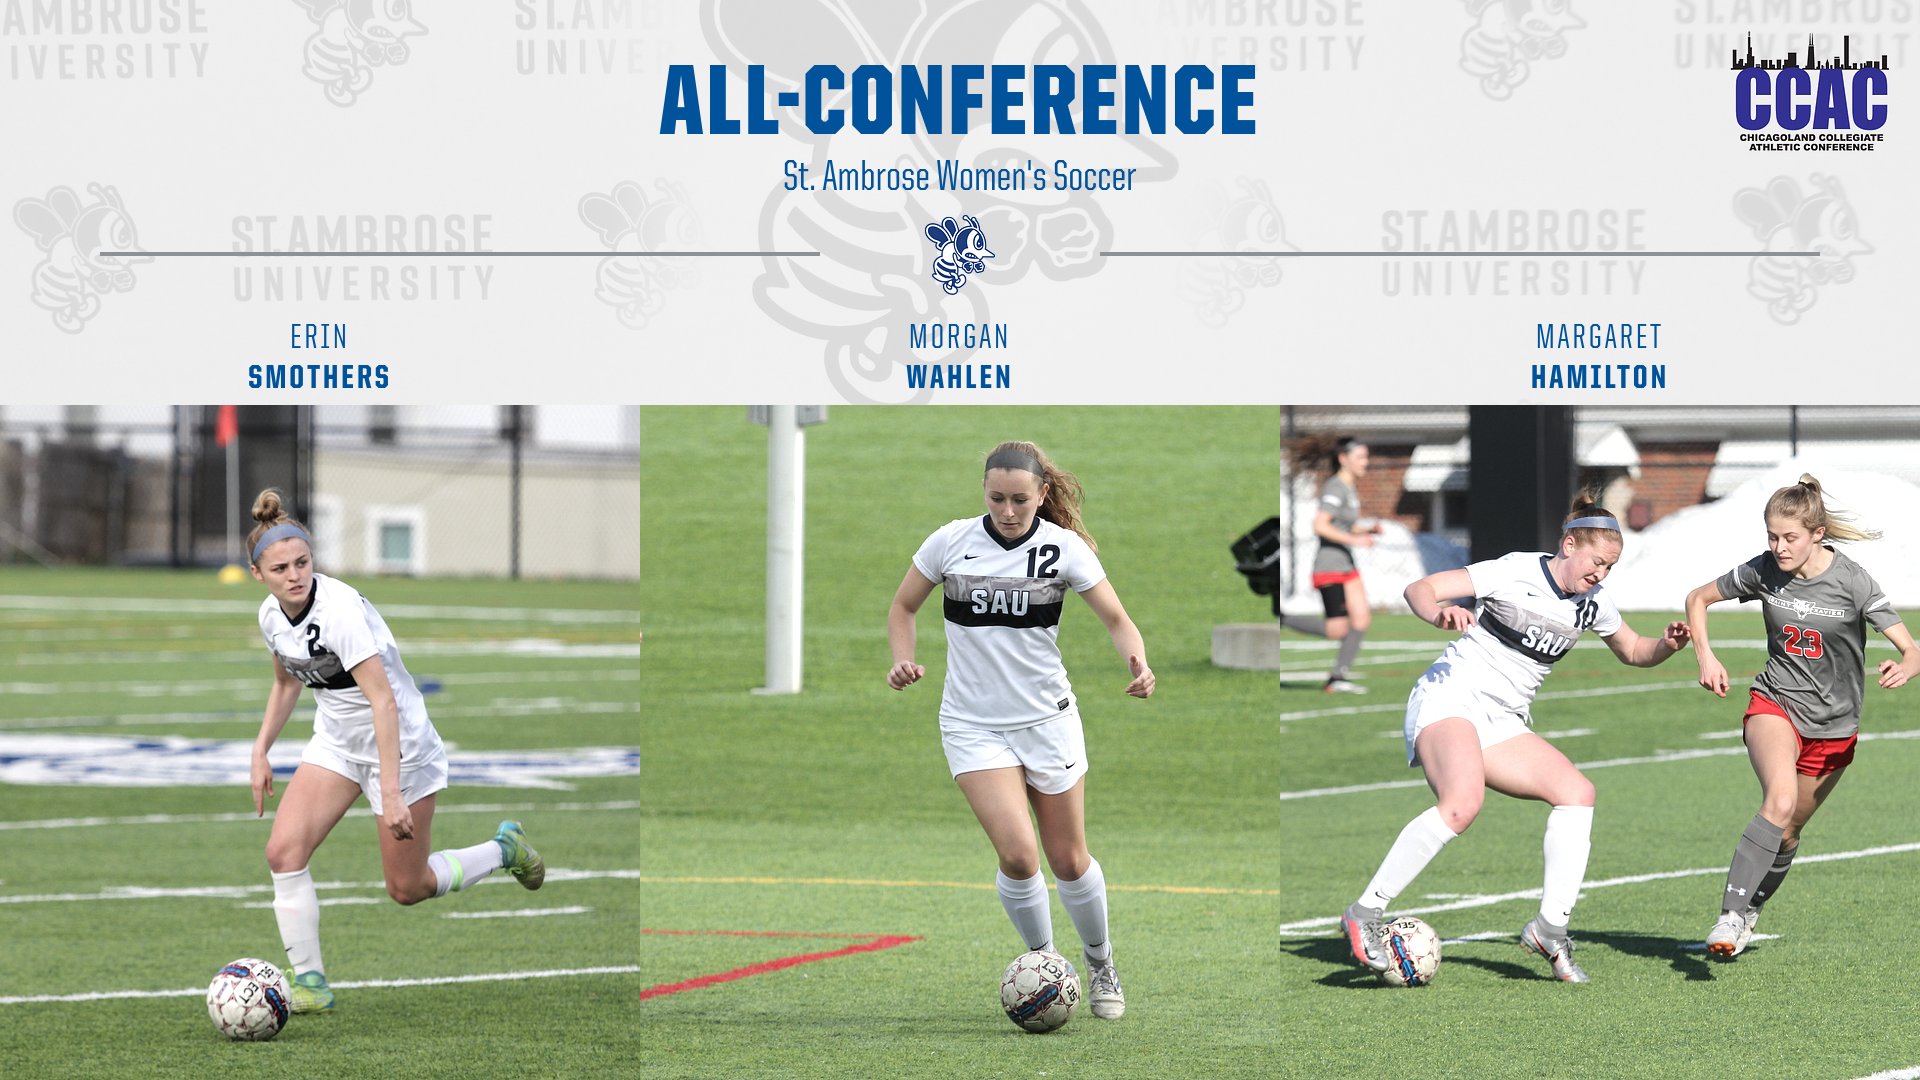 Smothers and Wahlen named first team all-CCAC; Hamilton on second team